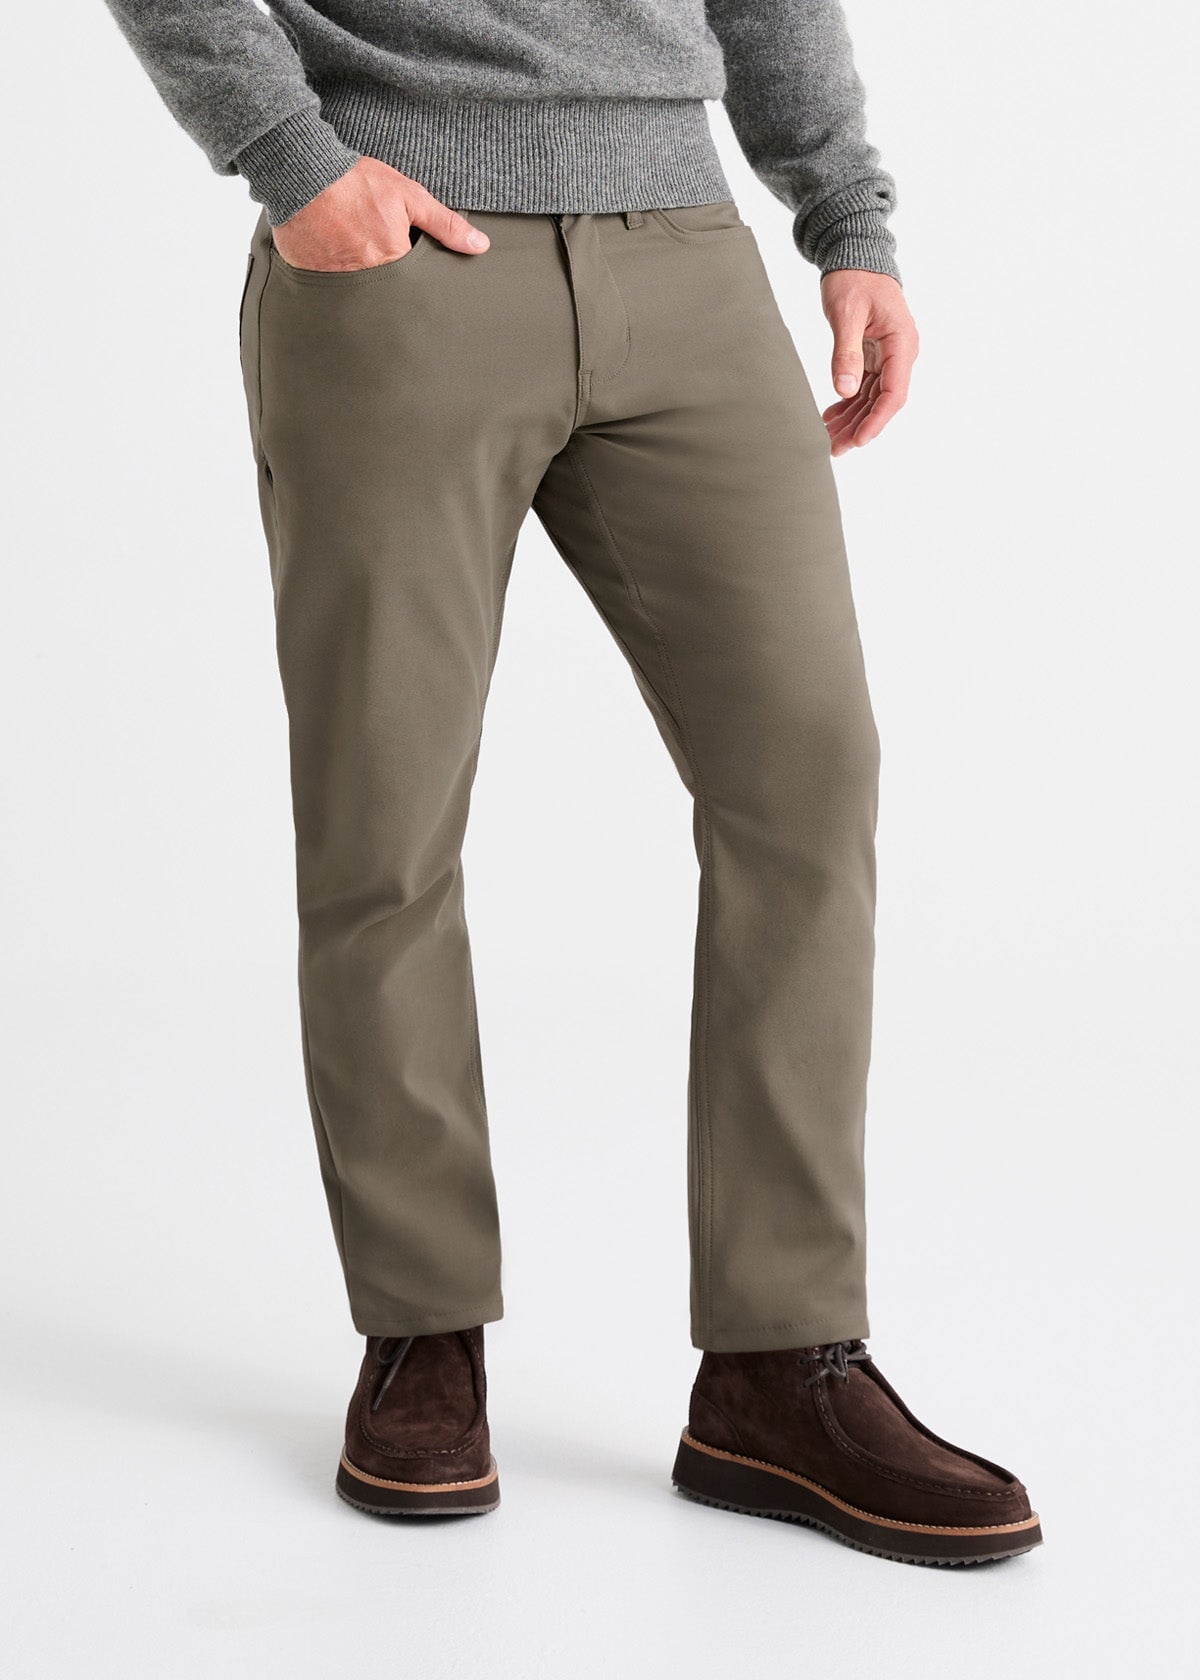 mens grey-green relaxed fit stretch pants front